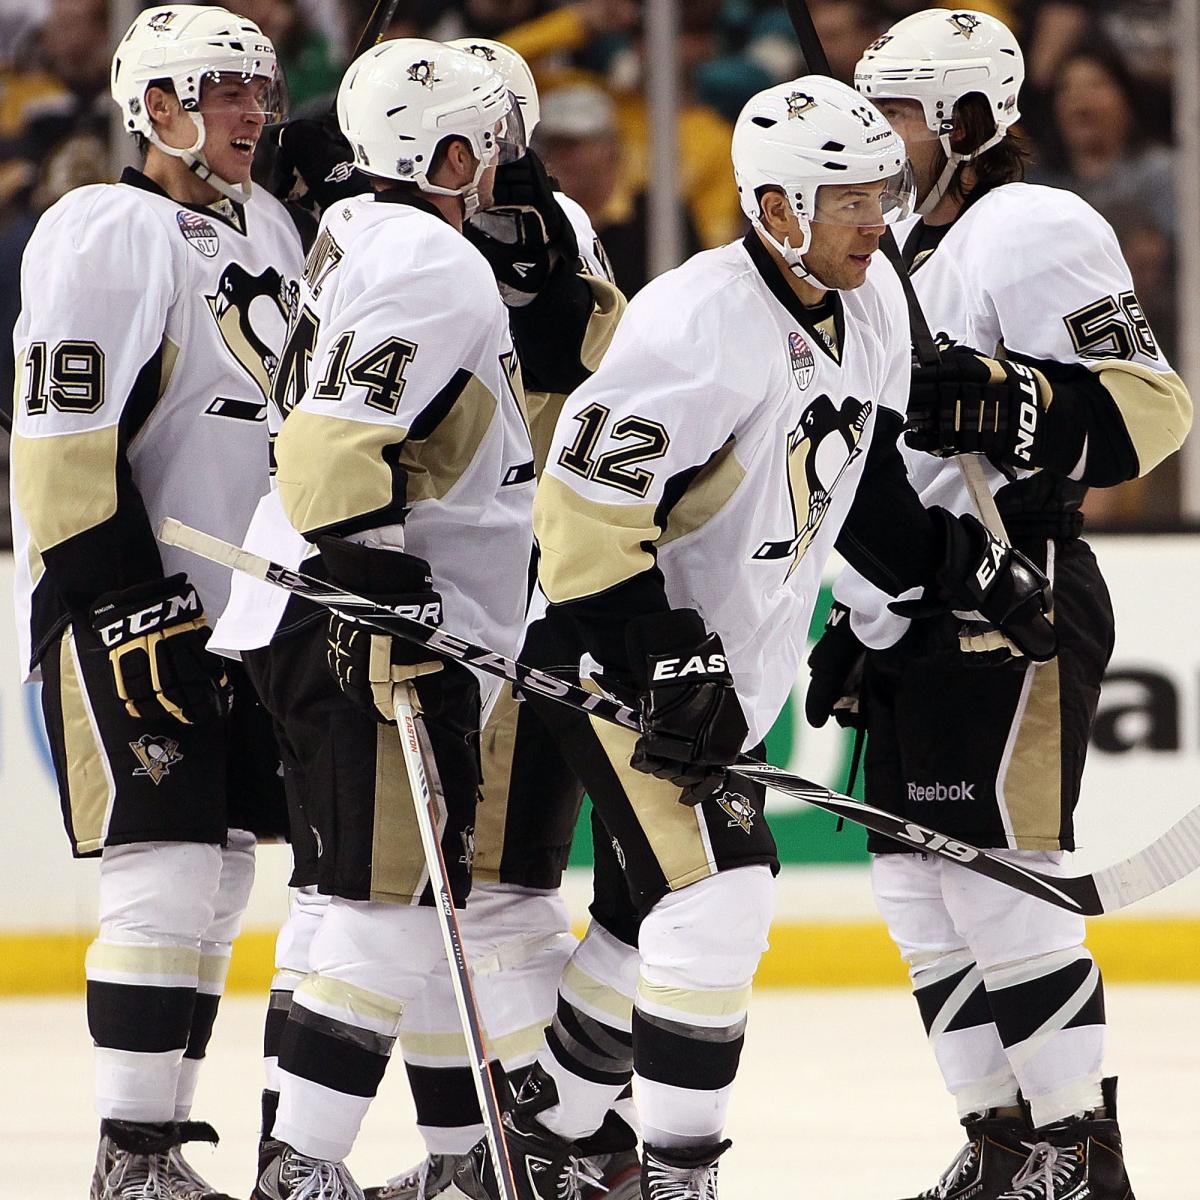 Nhl Playoff Predictions 2013 Analyzing Odds On Favorites To Win Stanley Cup News Scores 